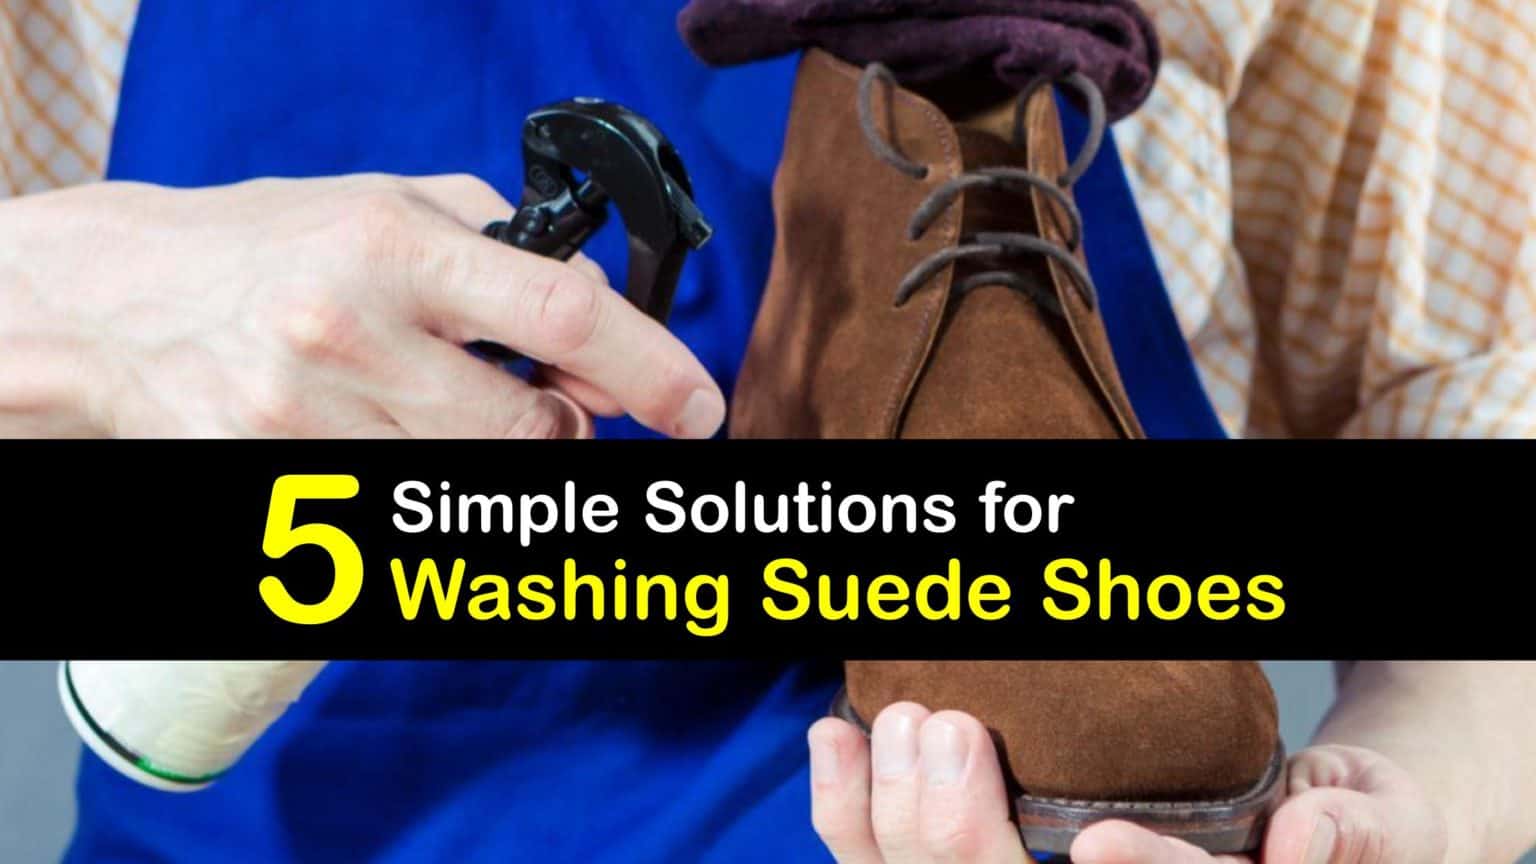 Washing Suede Shoes - Terrific Tips for Cleaning Suede Shoes